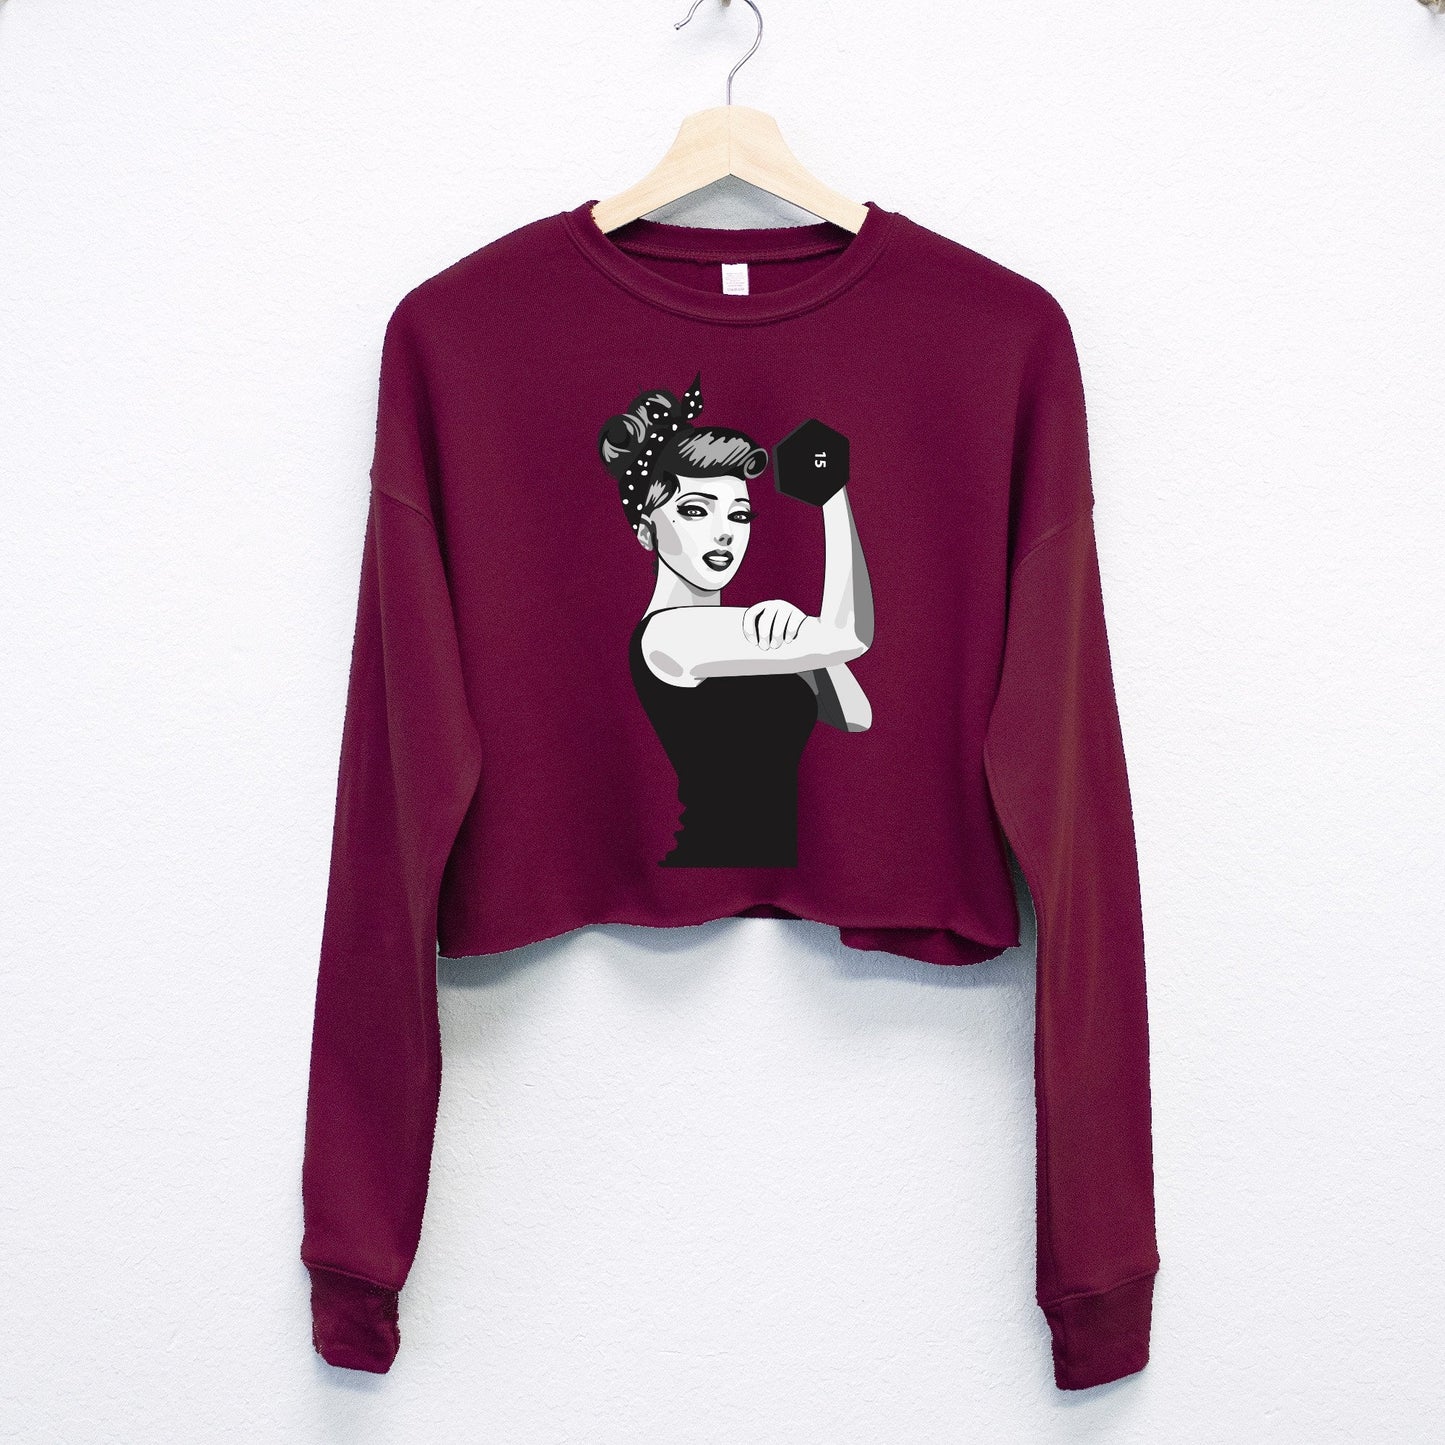 Rosie the Riveter Cropped Soft Sweater - BeExtra! Apparel & More